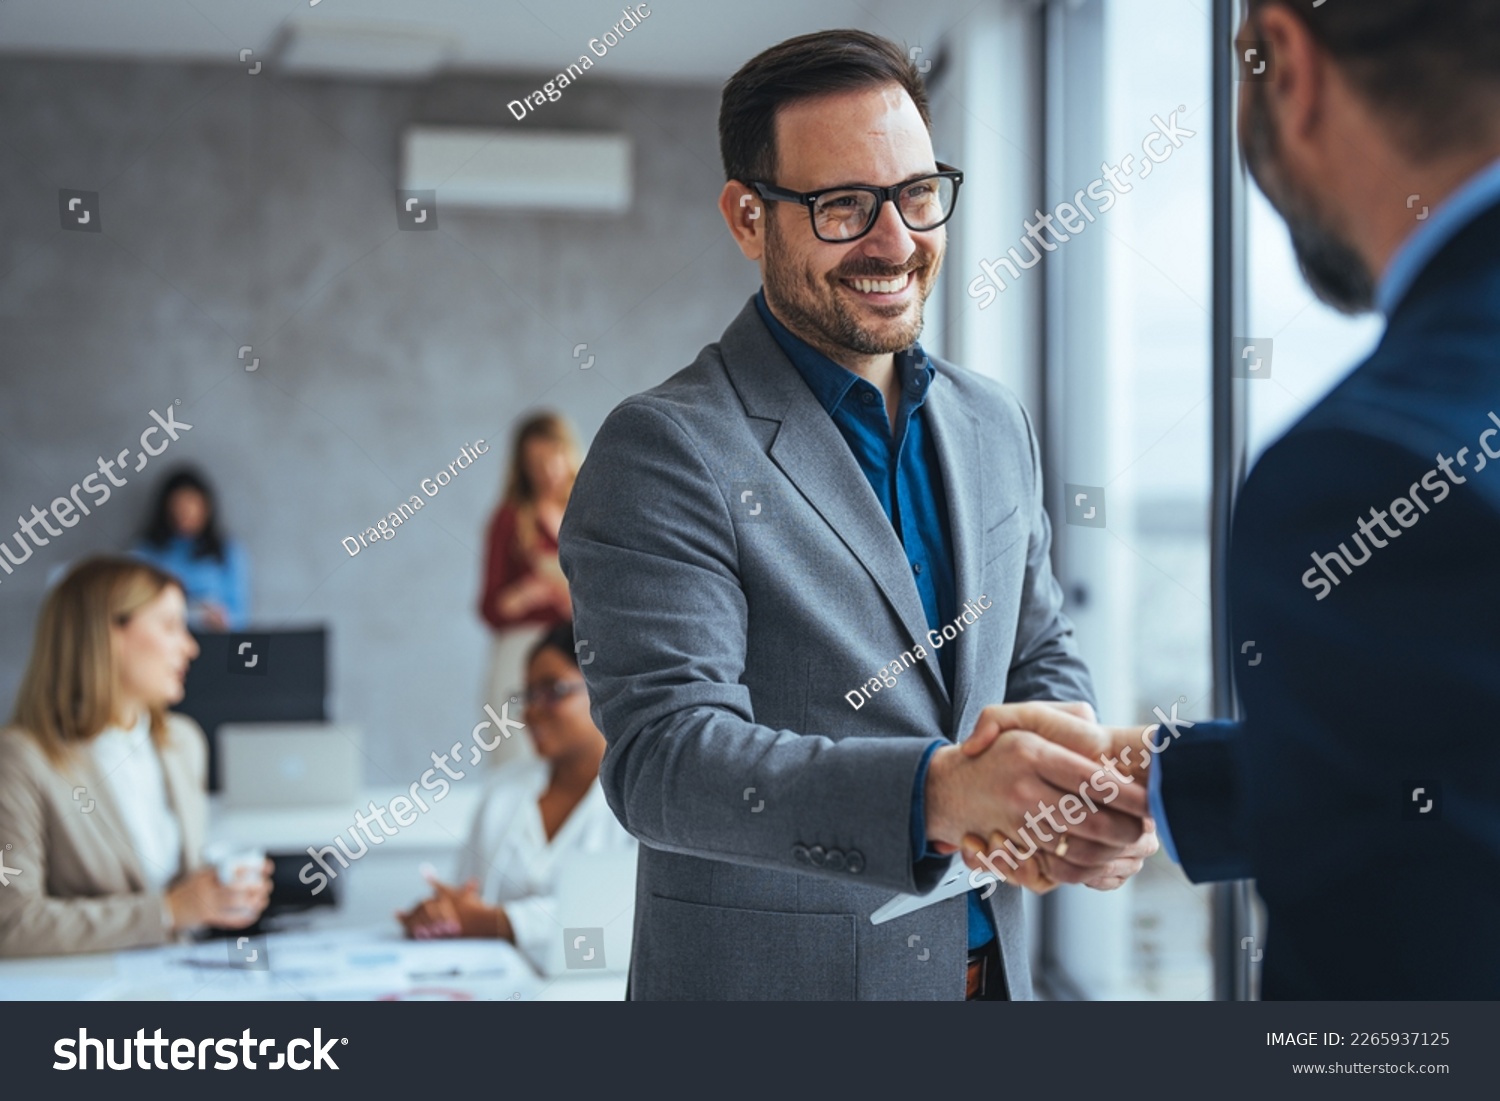 Shot of two businessmen shaking hands in an office. Two smiling businessmen shaking hands while standing in an office. Business people shaking hands, finishing up a meeting #2265937125